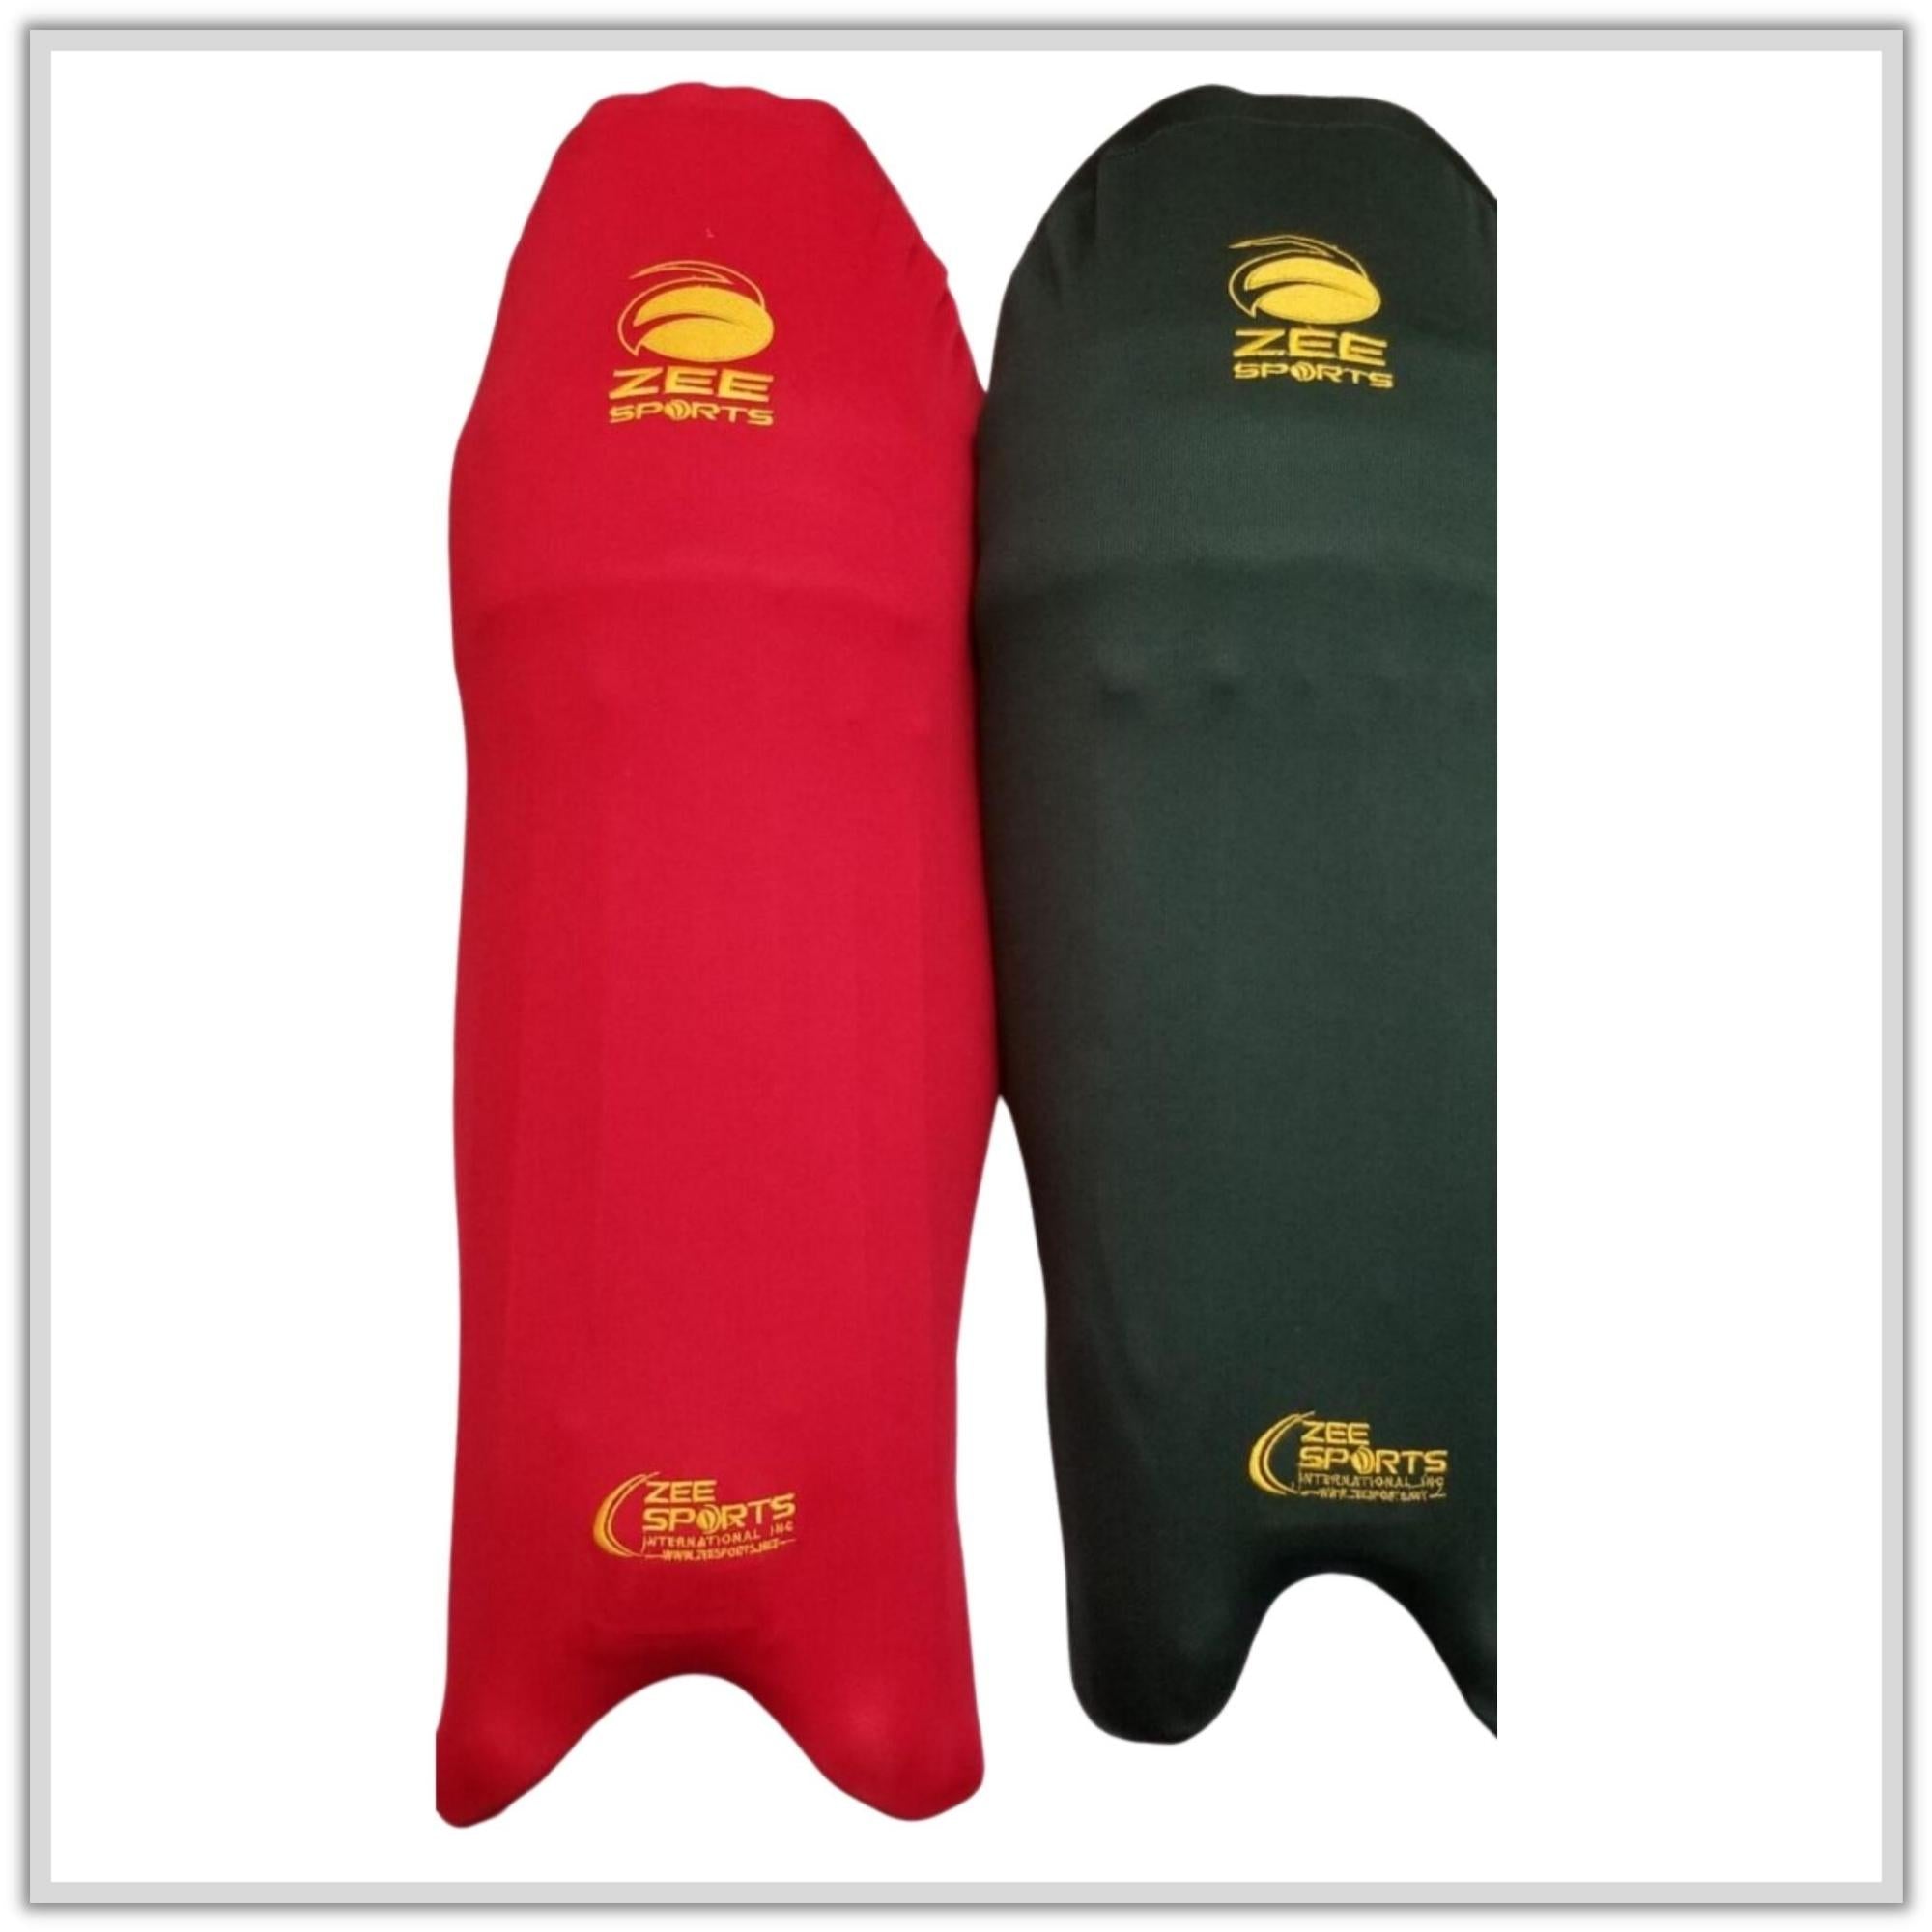 Zee Sports Color Pads Covers